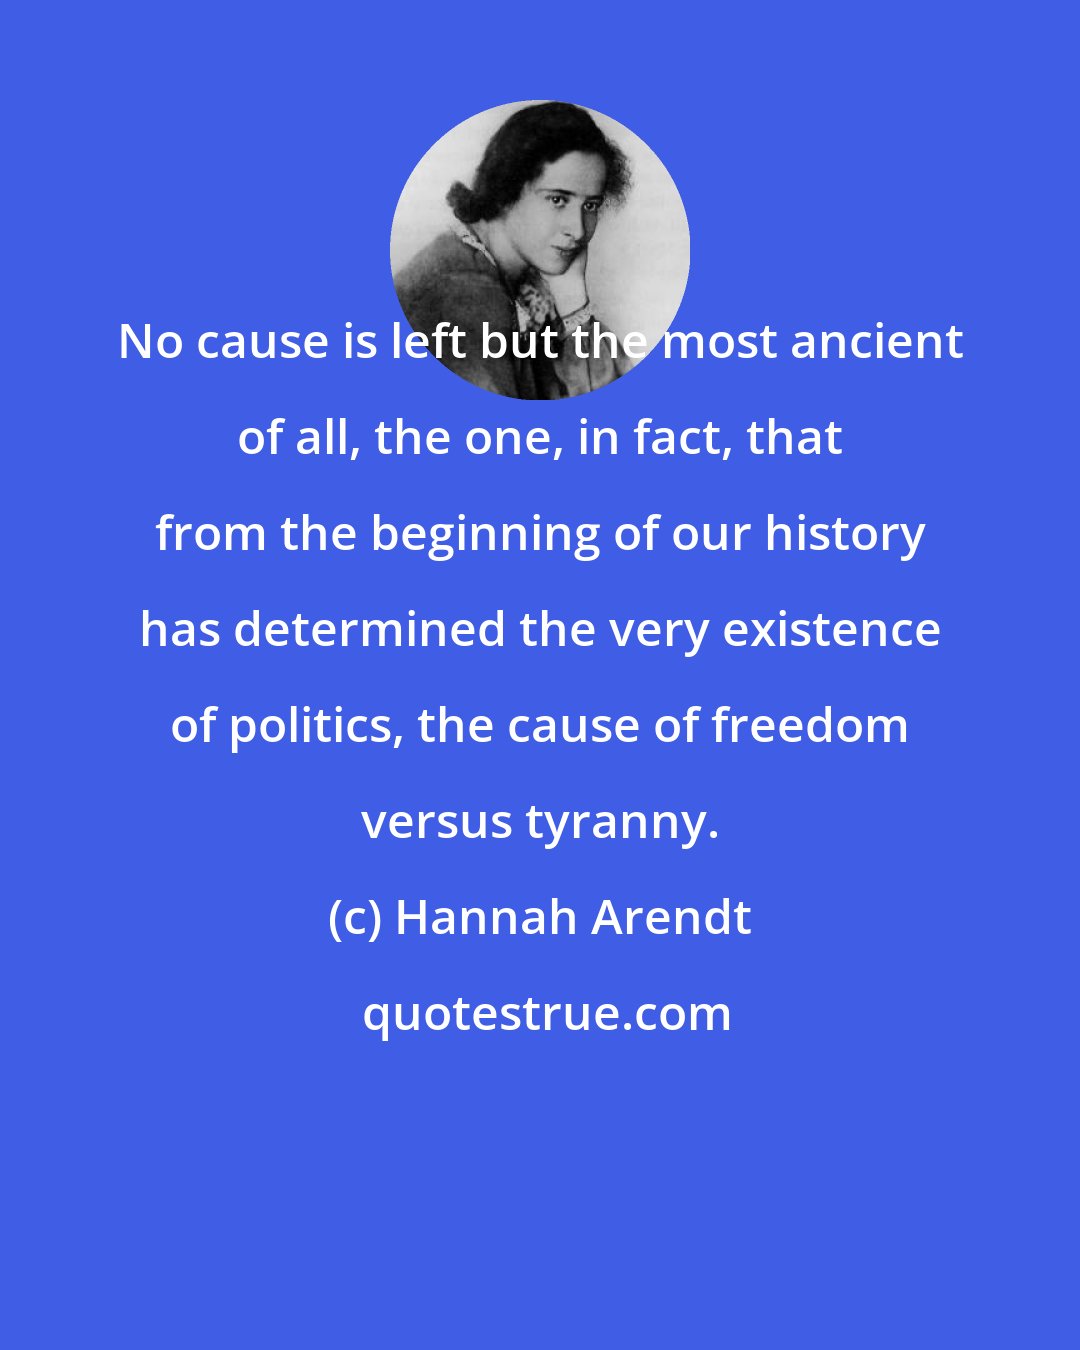 Hannah Arendt: No cause is left but the most ancient of all, the one, in fact, that from the beginning of our history has determined the very existence of politics, the cause of freedom versus tyranny.